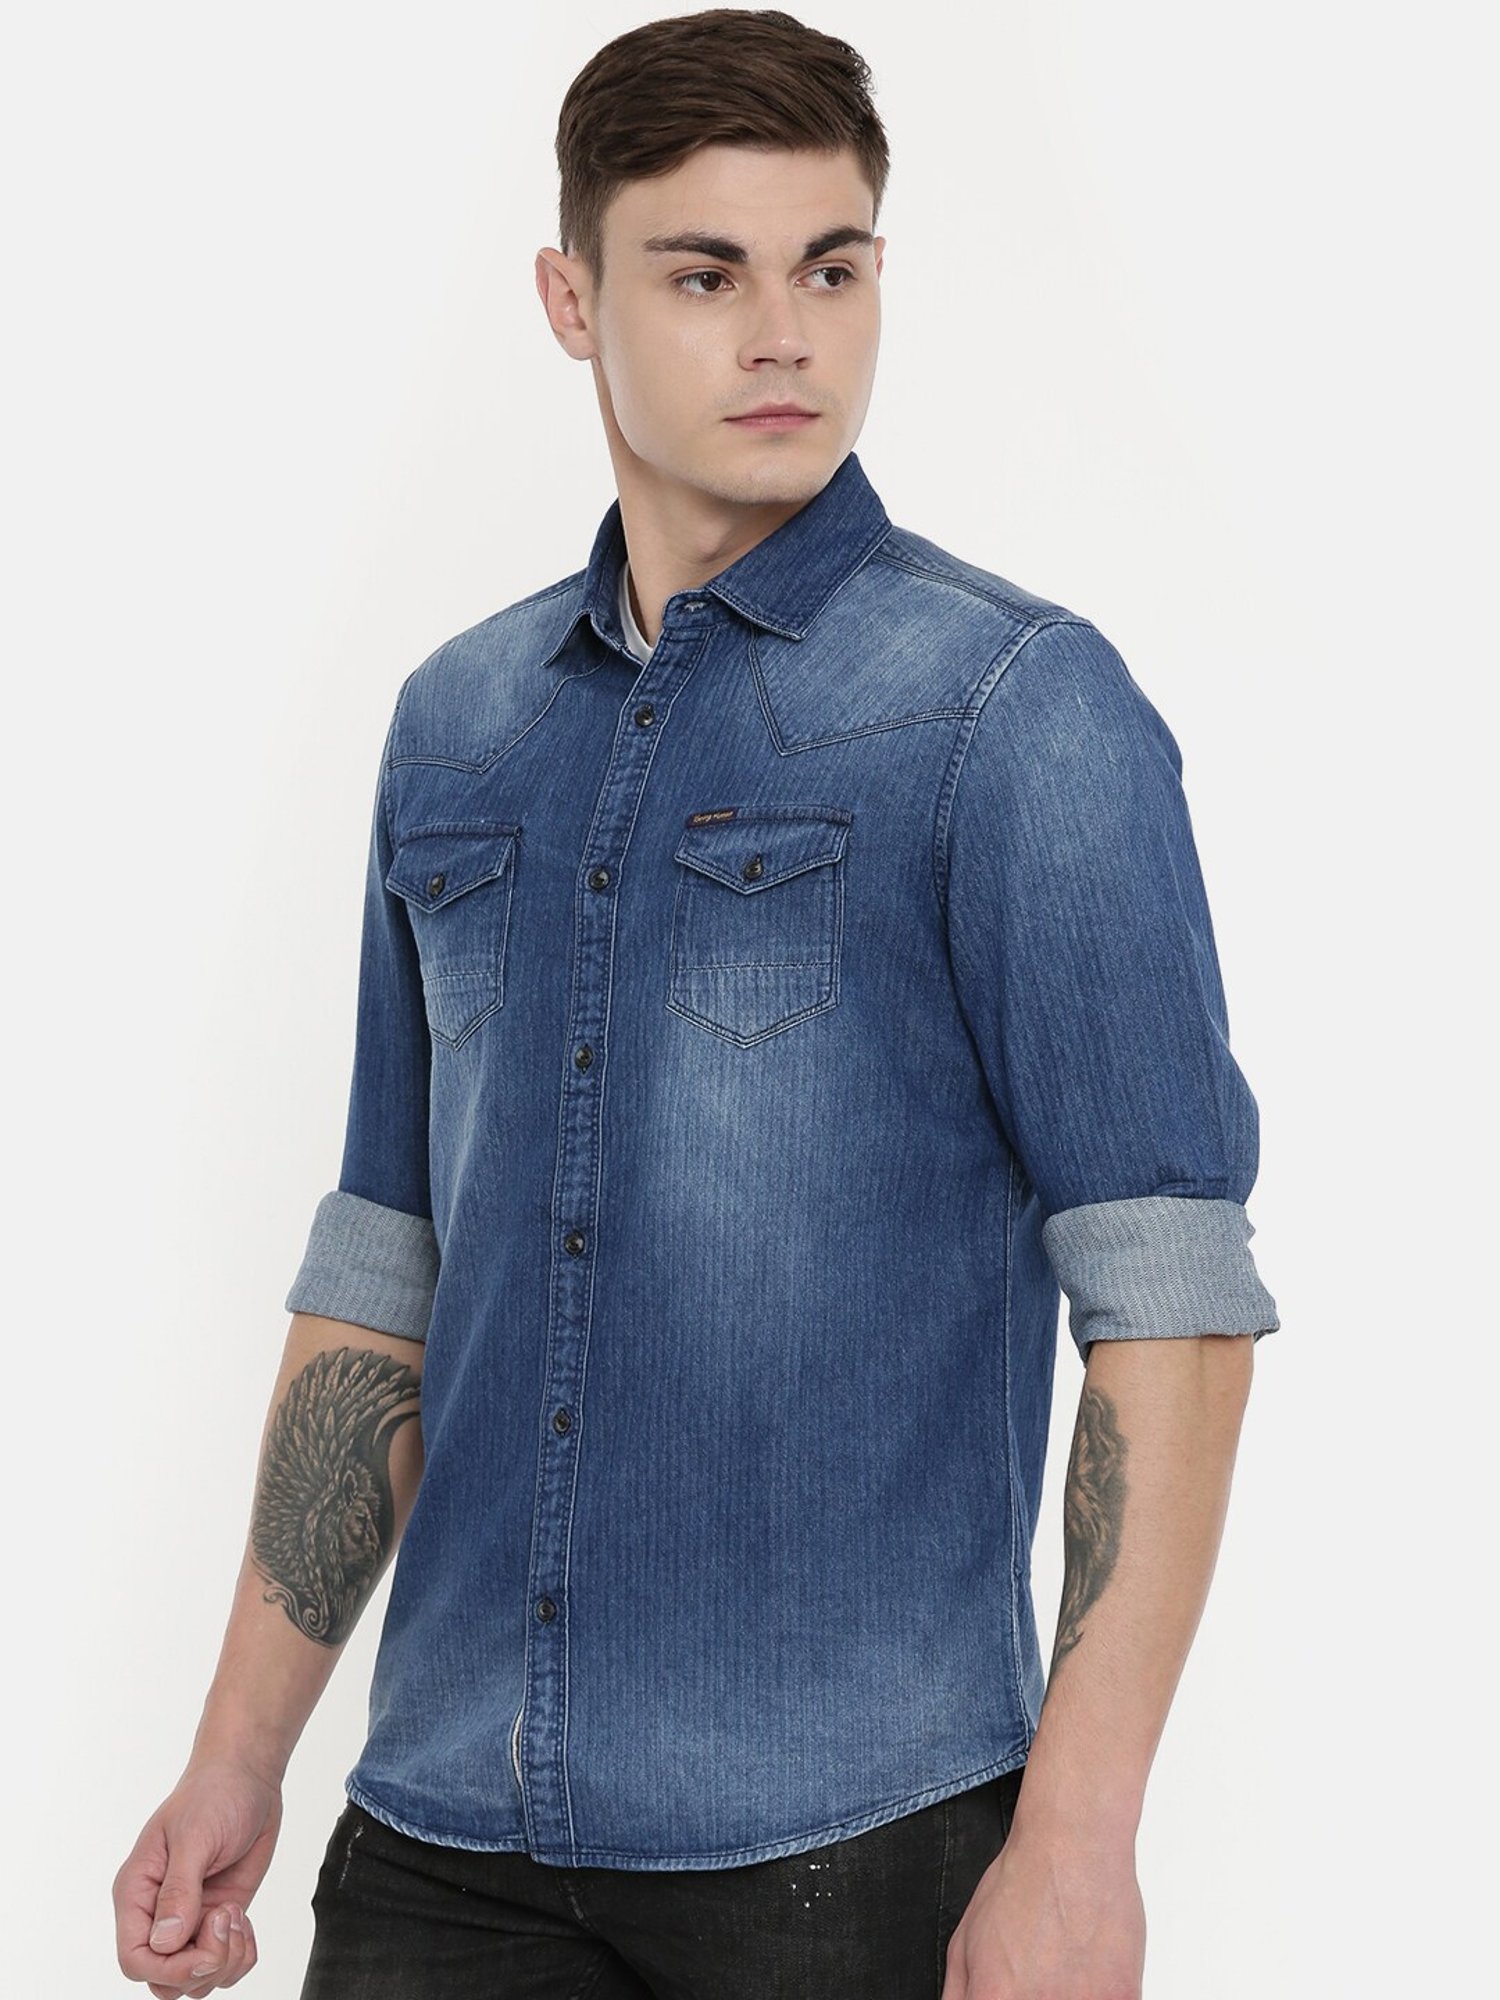 Highlander Men's Casual Shirt (13110001492119_HLSH009089_X-Large_Mid Denim)  : Amazon.in: Clothing & Accessories